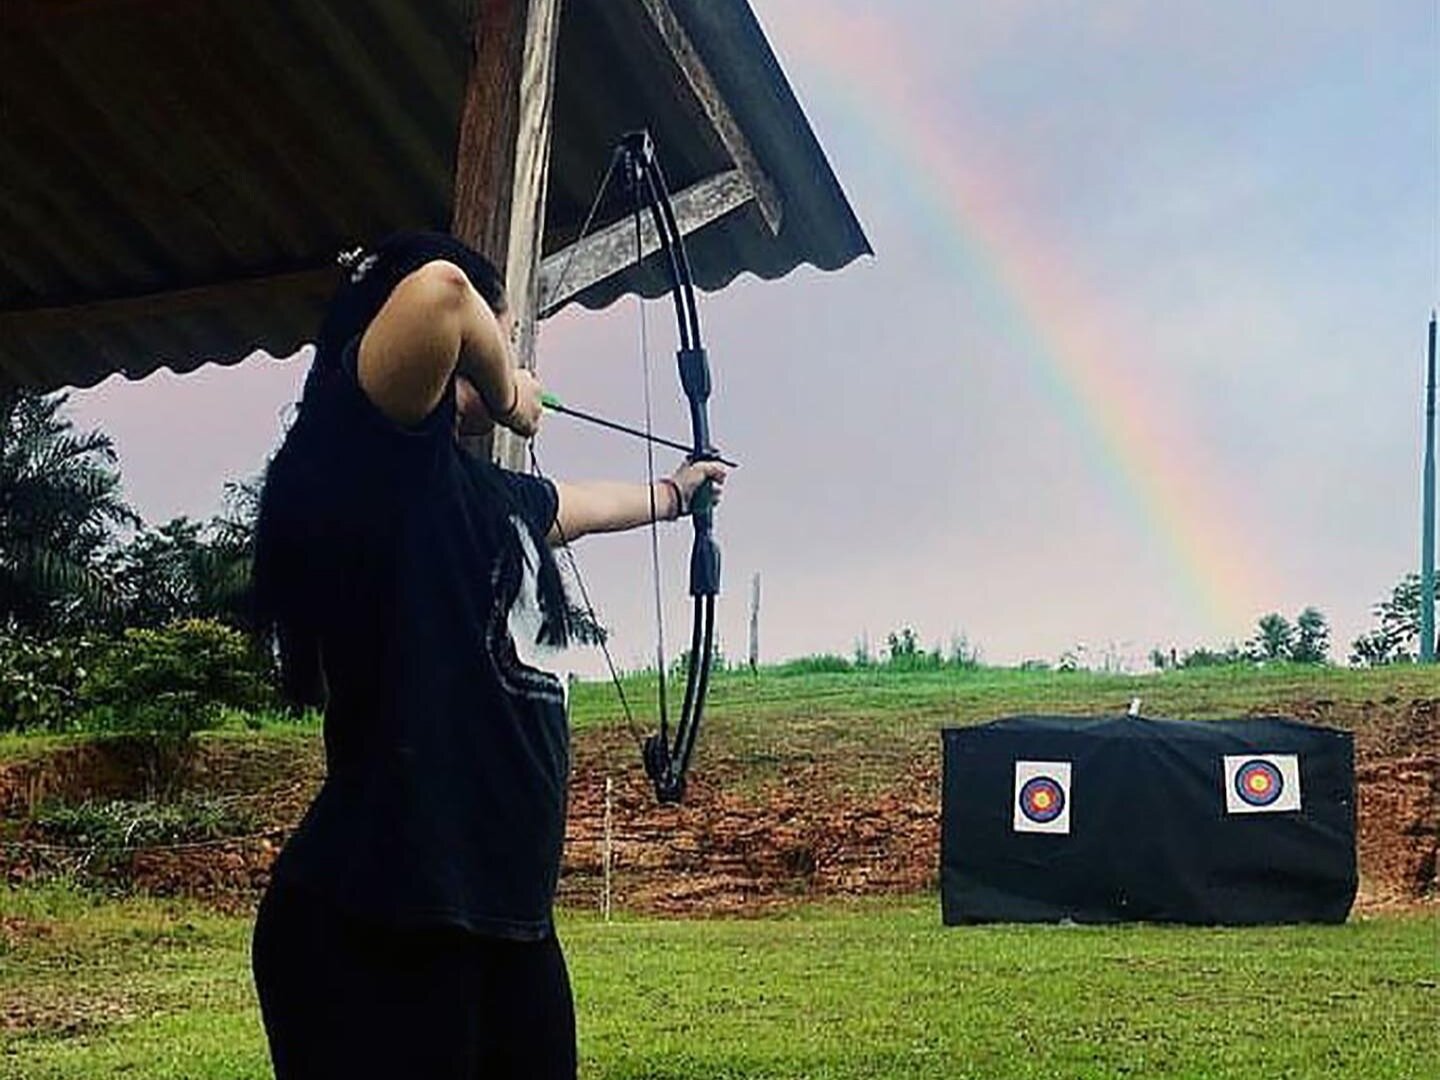 Girl archer with rainbow in background OPT.jpg